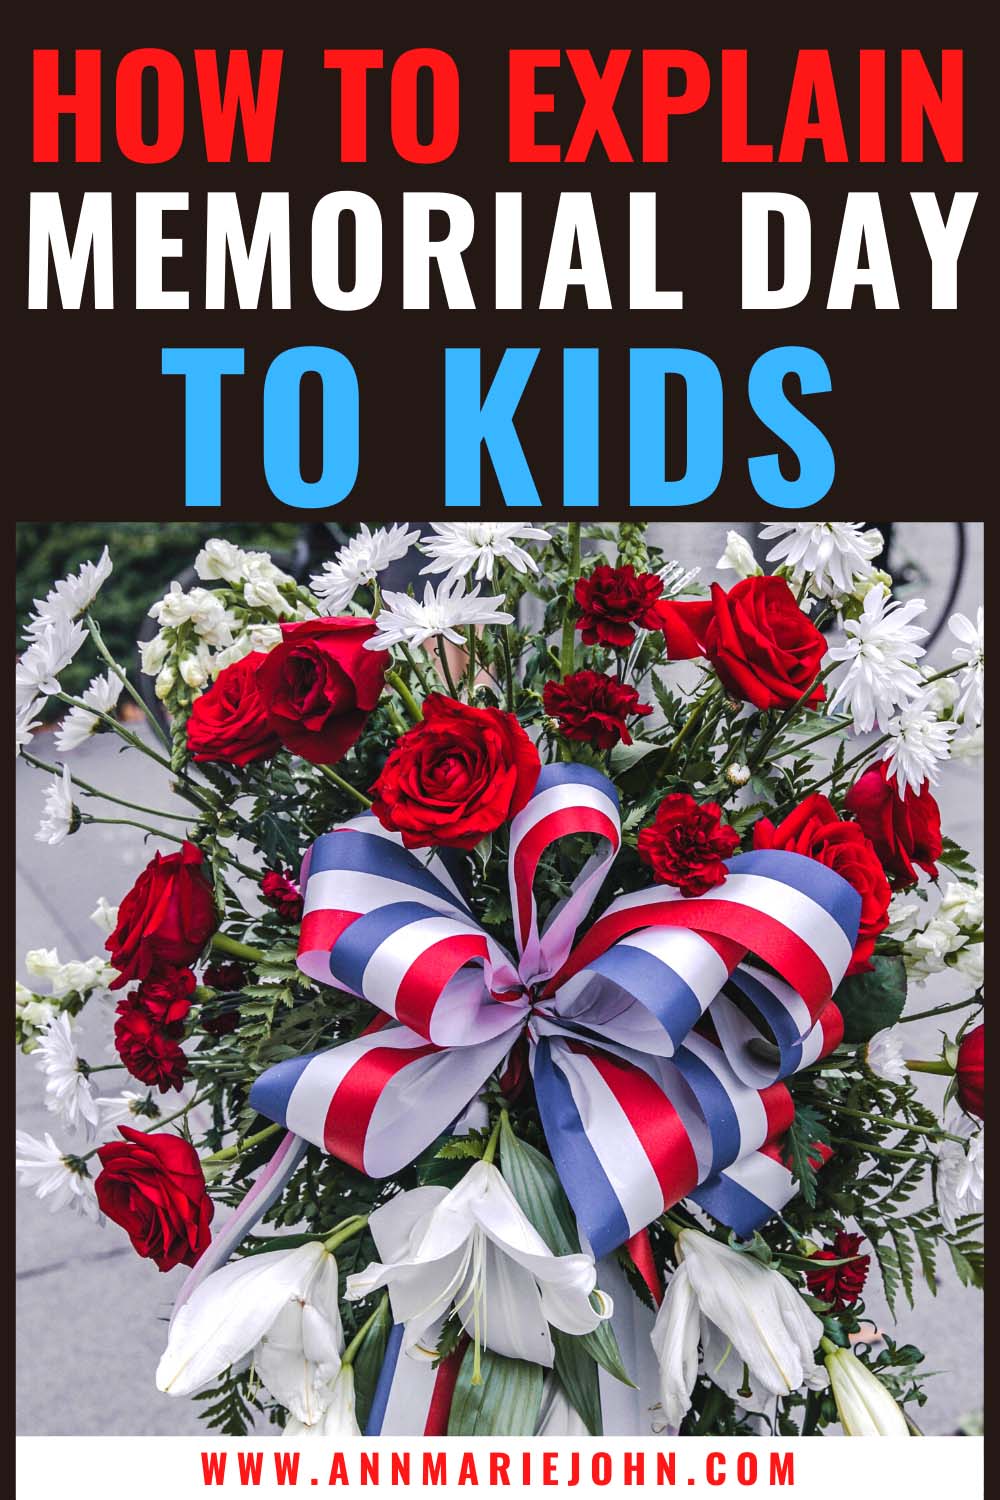 How to Explain Memorial Day to Kids